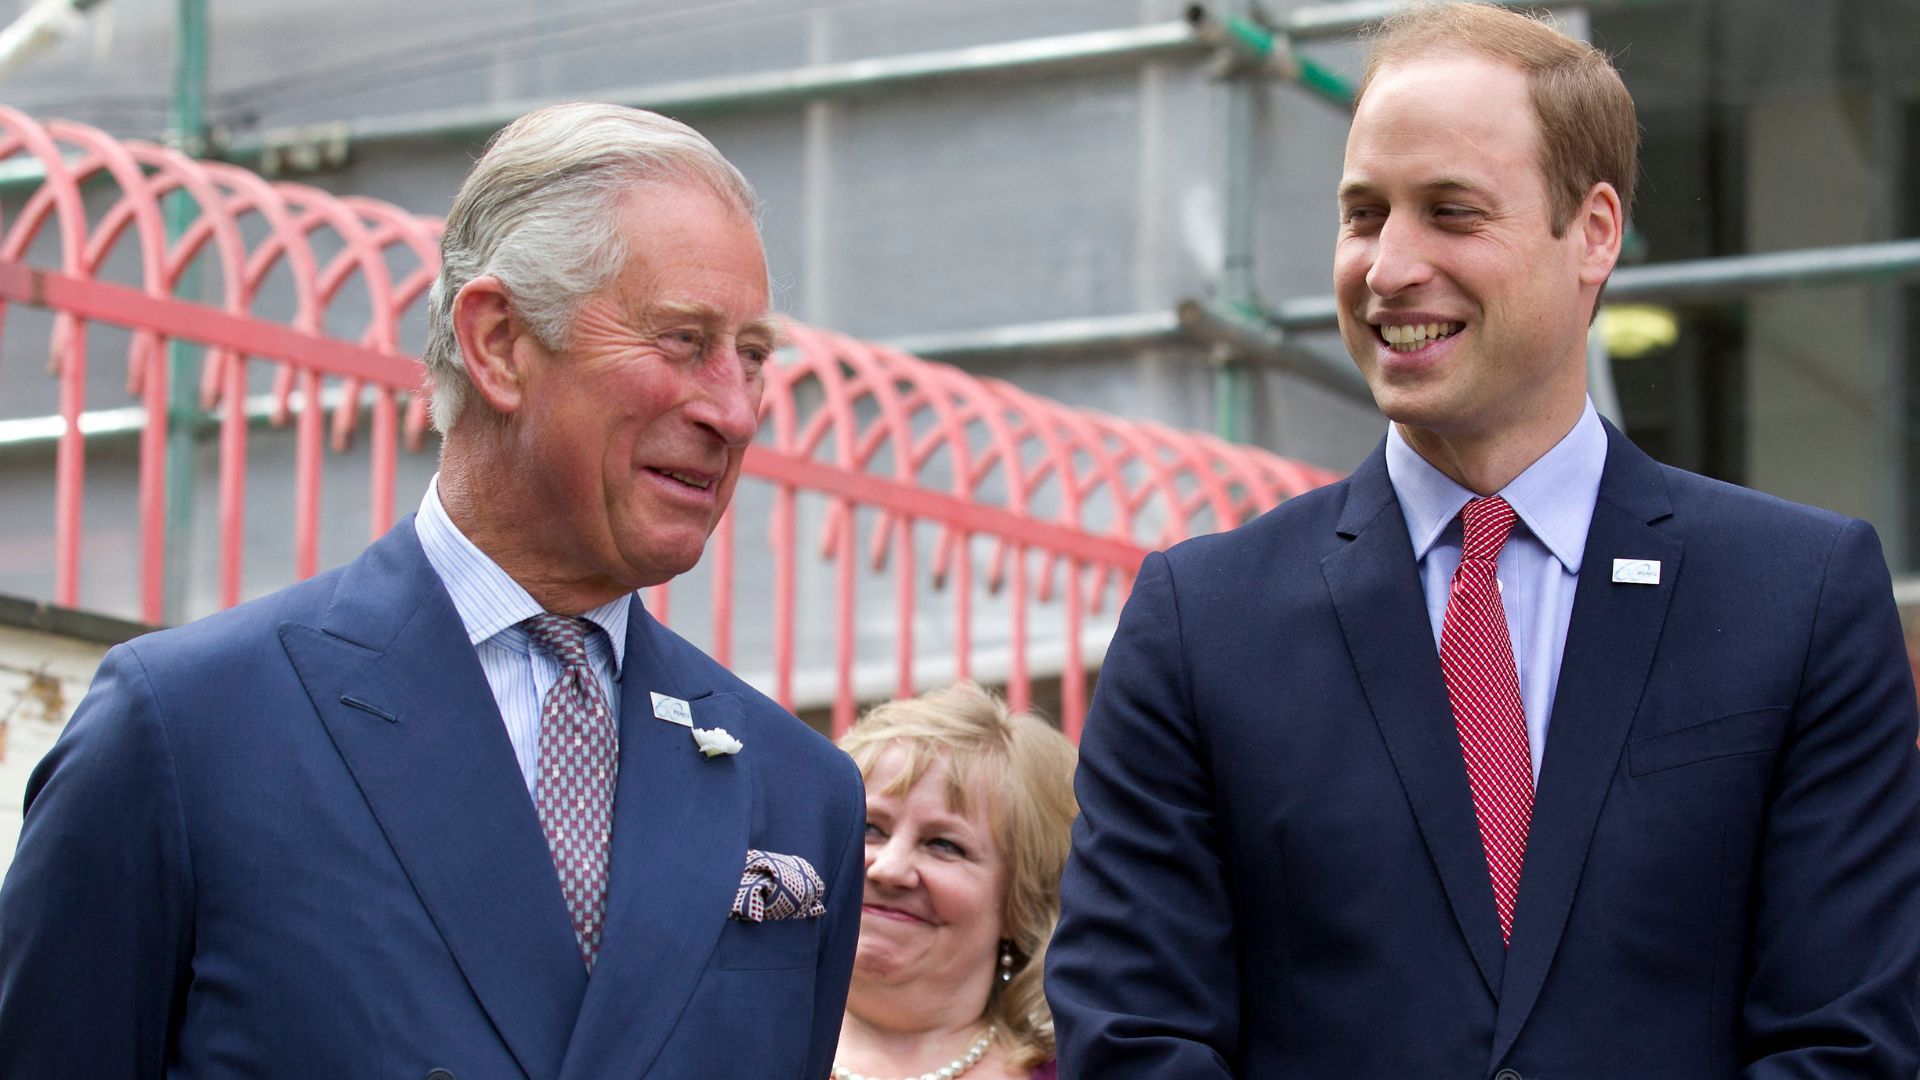 <p>                     In 2014, Prince William formally took over King Charles’s position as the President of the British Sub-Aqua Club. During the speech at the ceremony marking the occasion, the chairman of the club described Charles as “rather buff” in a swimwear shot of him from the 70s. The then-Prince Charles joked that Prince William was displaying his own “buff credentials” as the new president, which got a big laugh from the audience as well as the prince himself.                   </p>